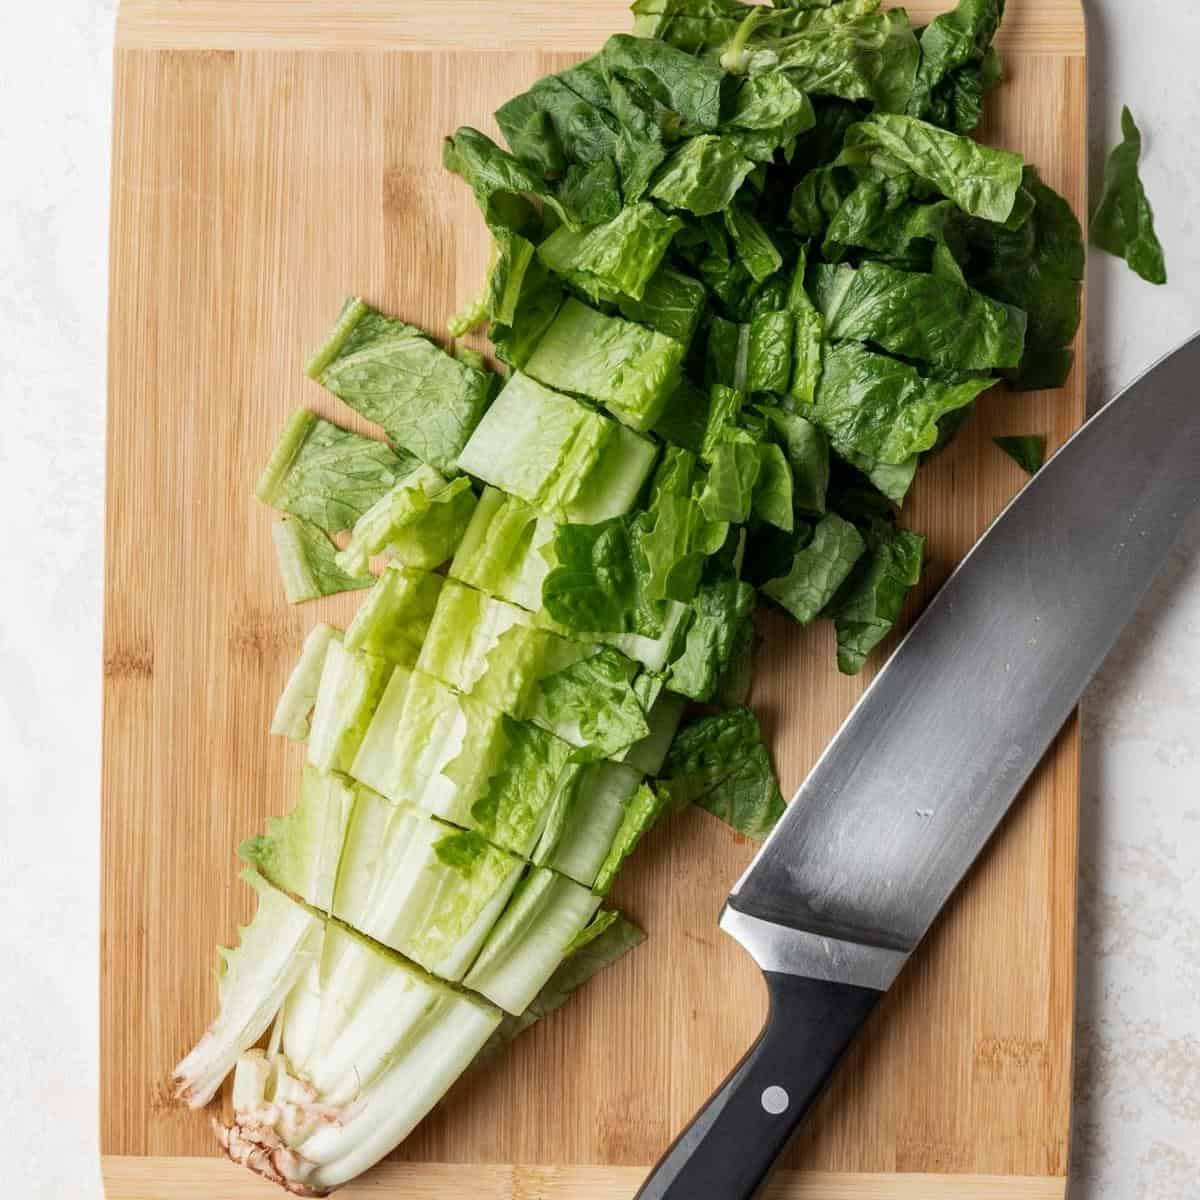 https://www.yourhomemadehealthy.com/wp-content/uploads/2022/02/Featured-How-To-Cut-Lettuce-For-Salad.jpg